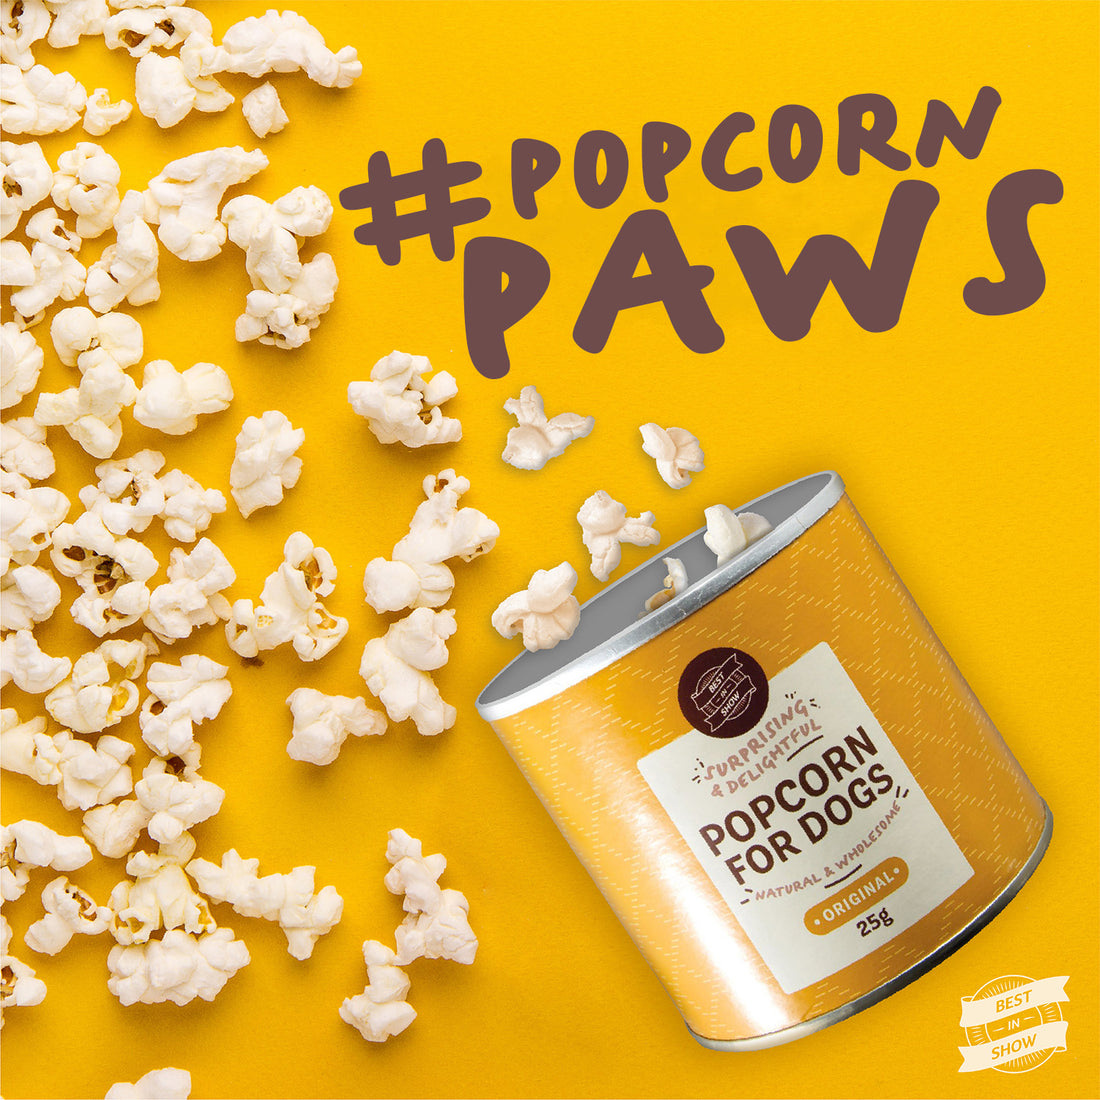 Curious Why Your Dog's Paws Smell Like Popcorn?